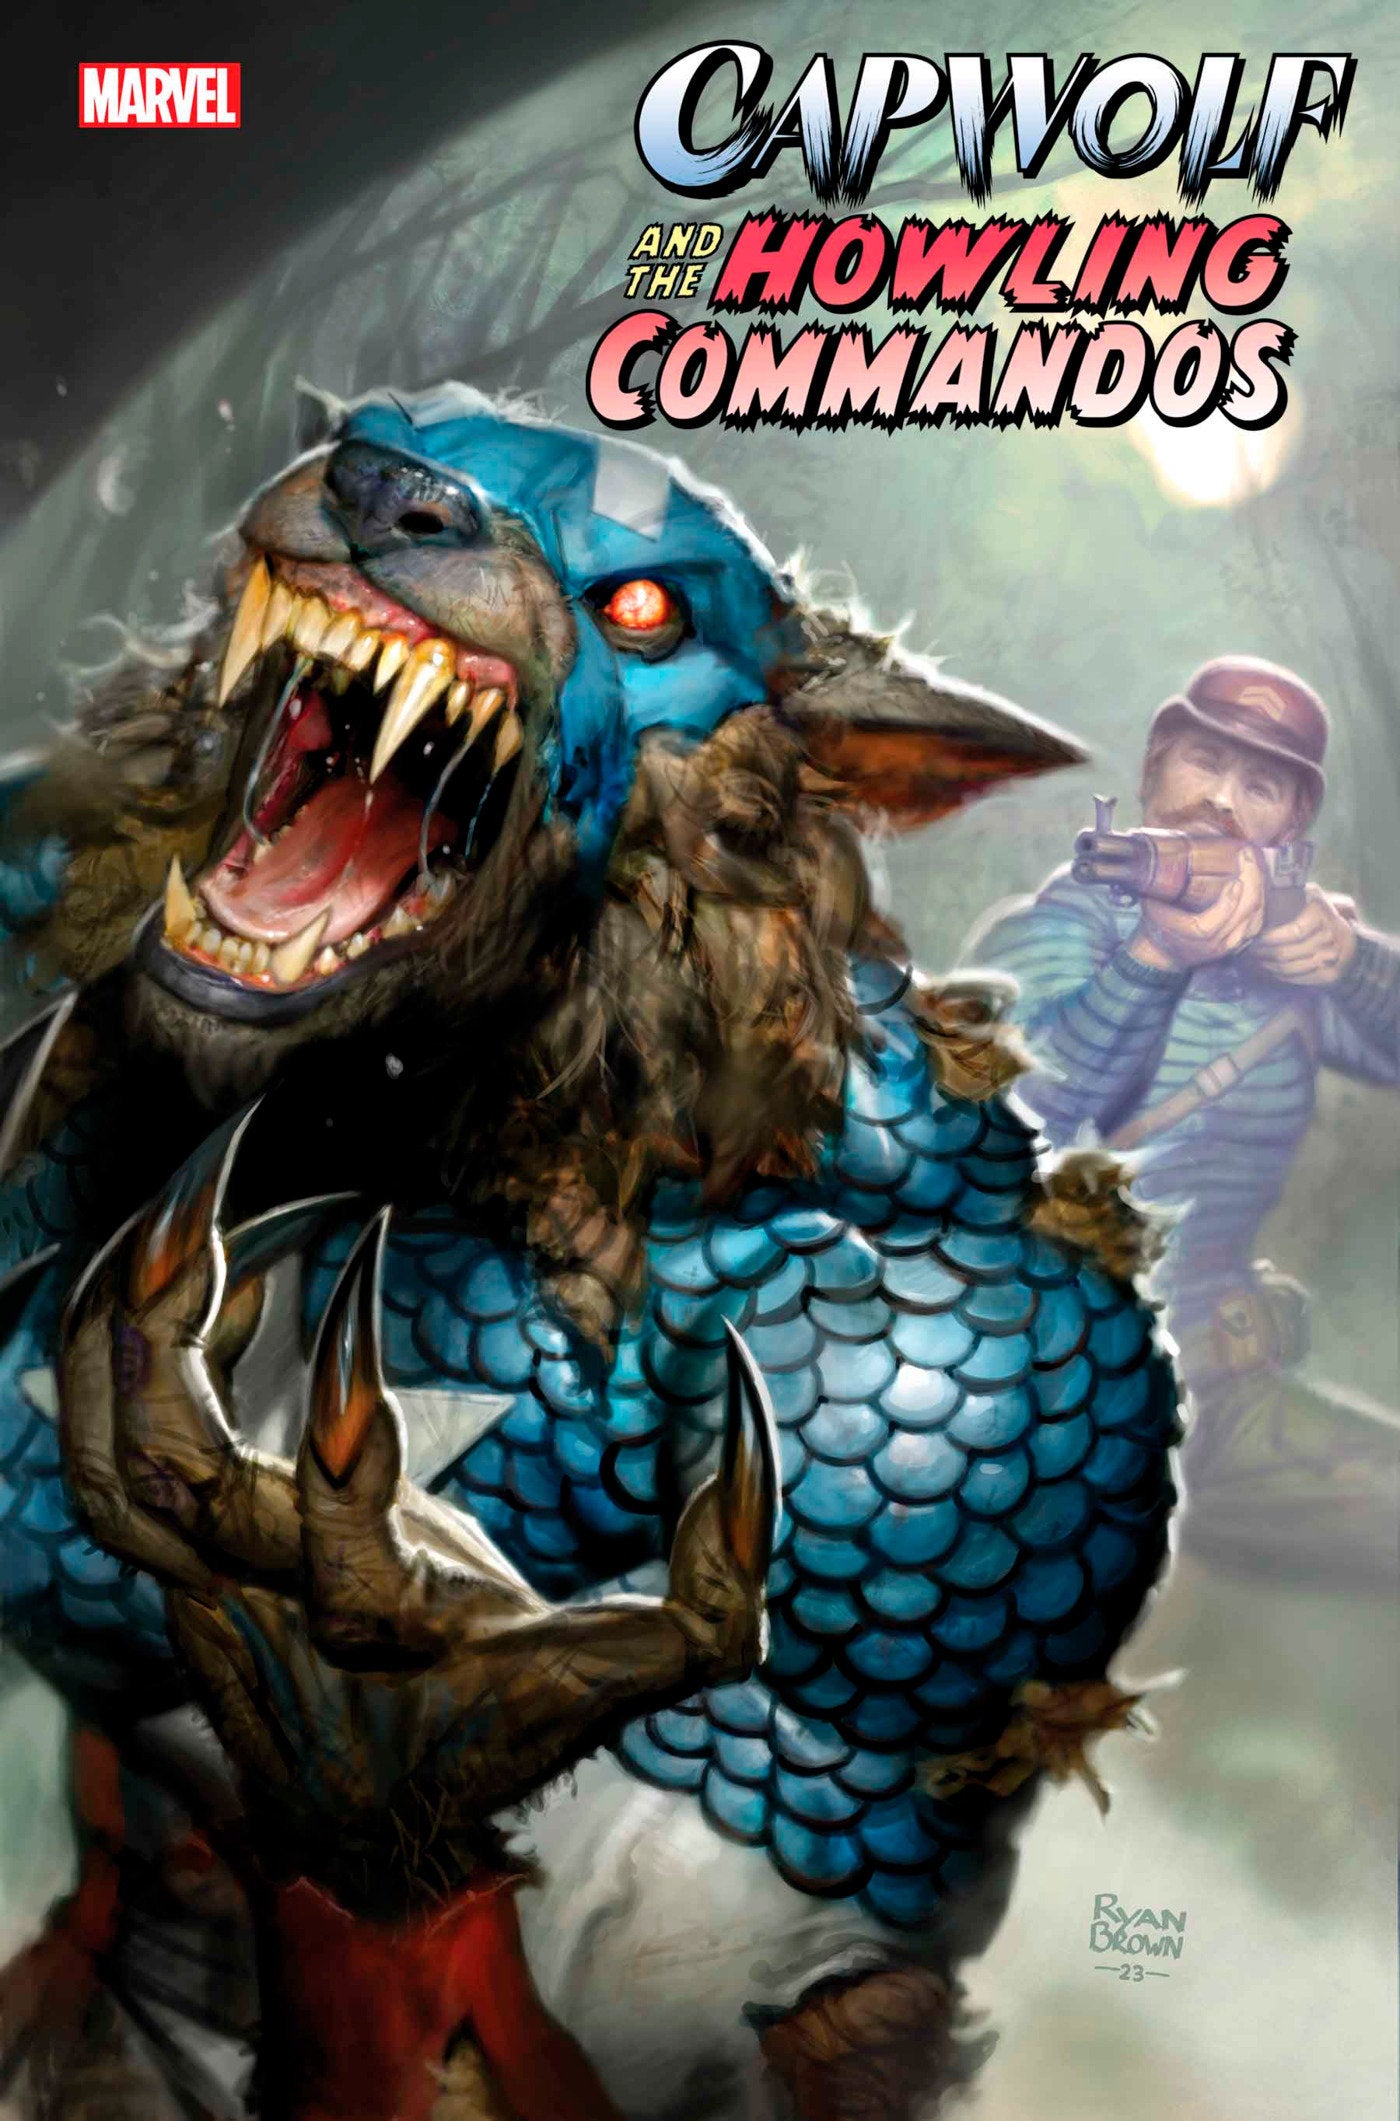 Stock photo of Capwolf & The Howling Commandos 2 Comics sold by Stronghold Collectibles